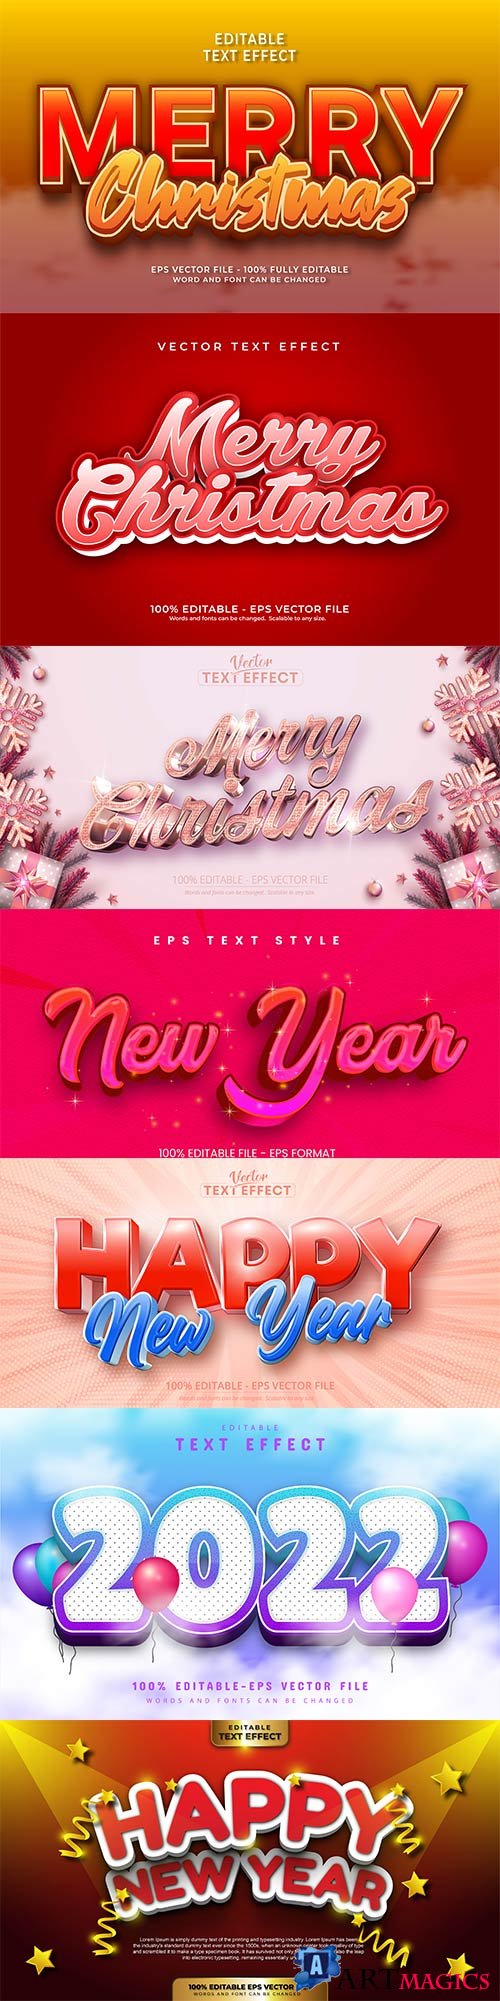 Merry christmas and happy new year 2022 editable vector text effects vol 28